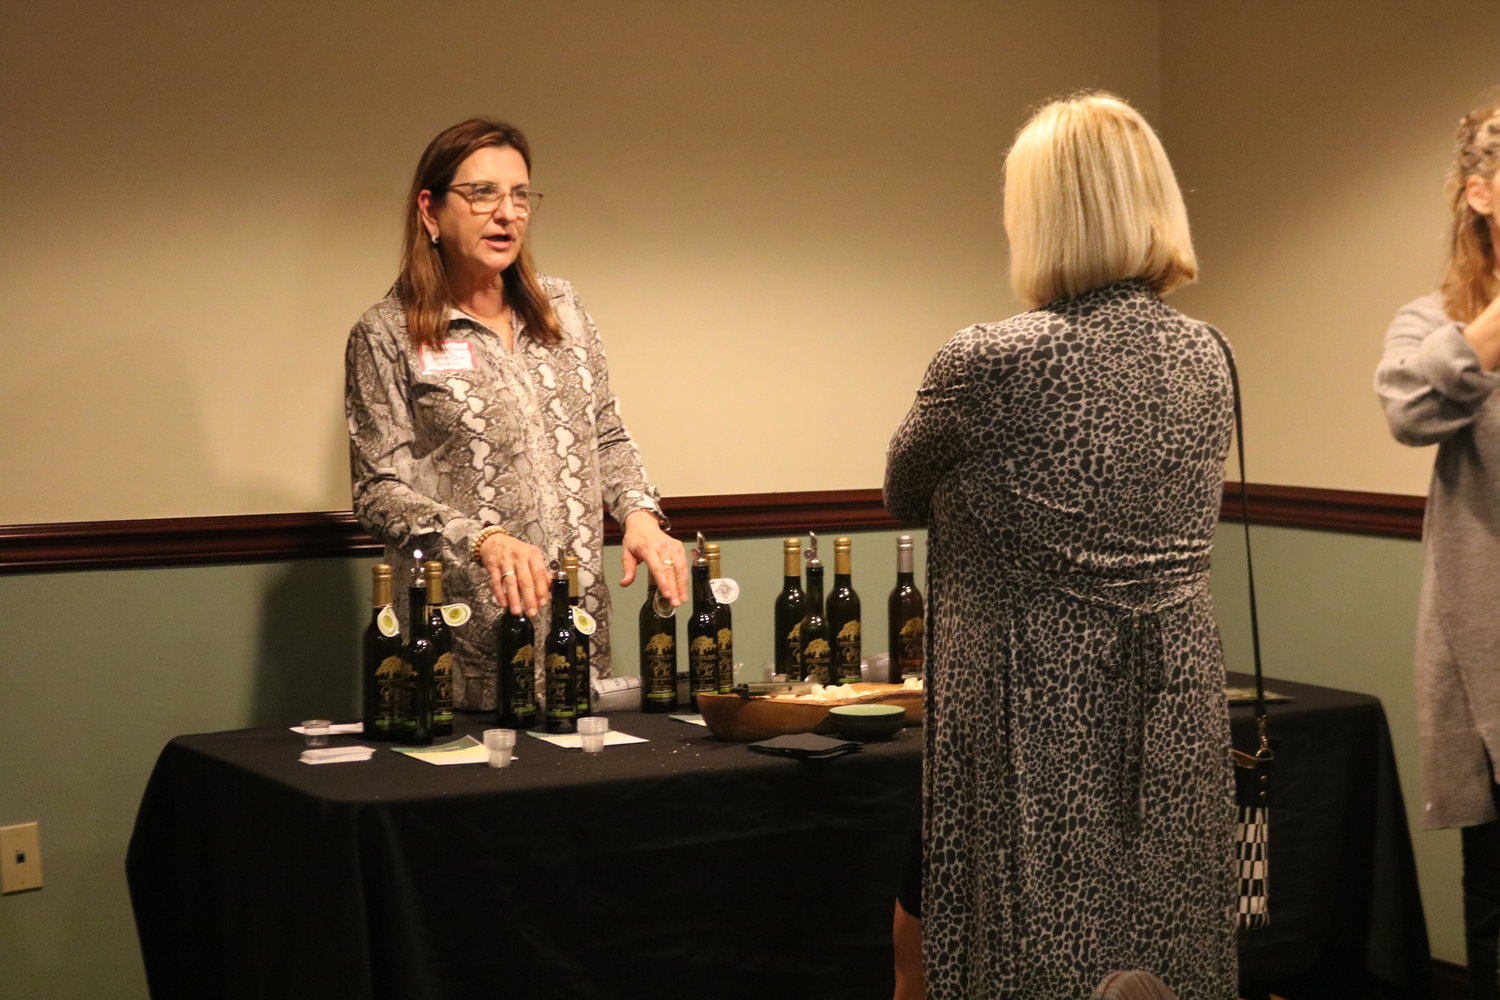 5.	Donna MacPherson explains the different types of olive oils of her Golden Isles business in St. Simons Island, Georgia.